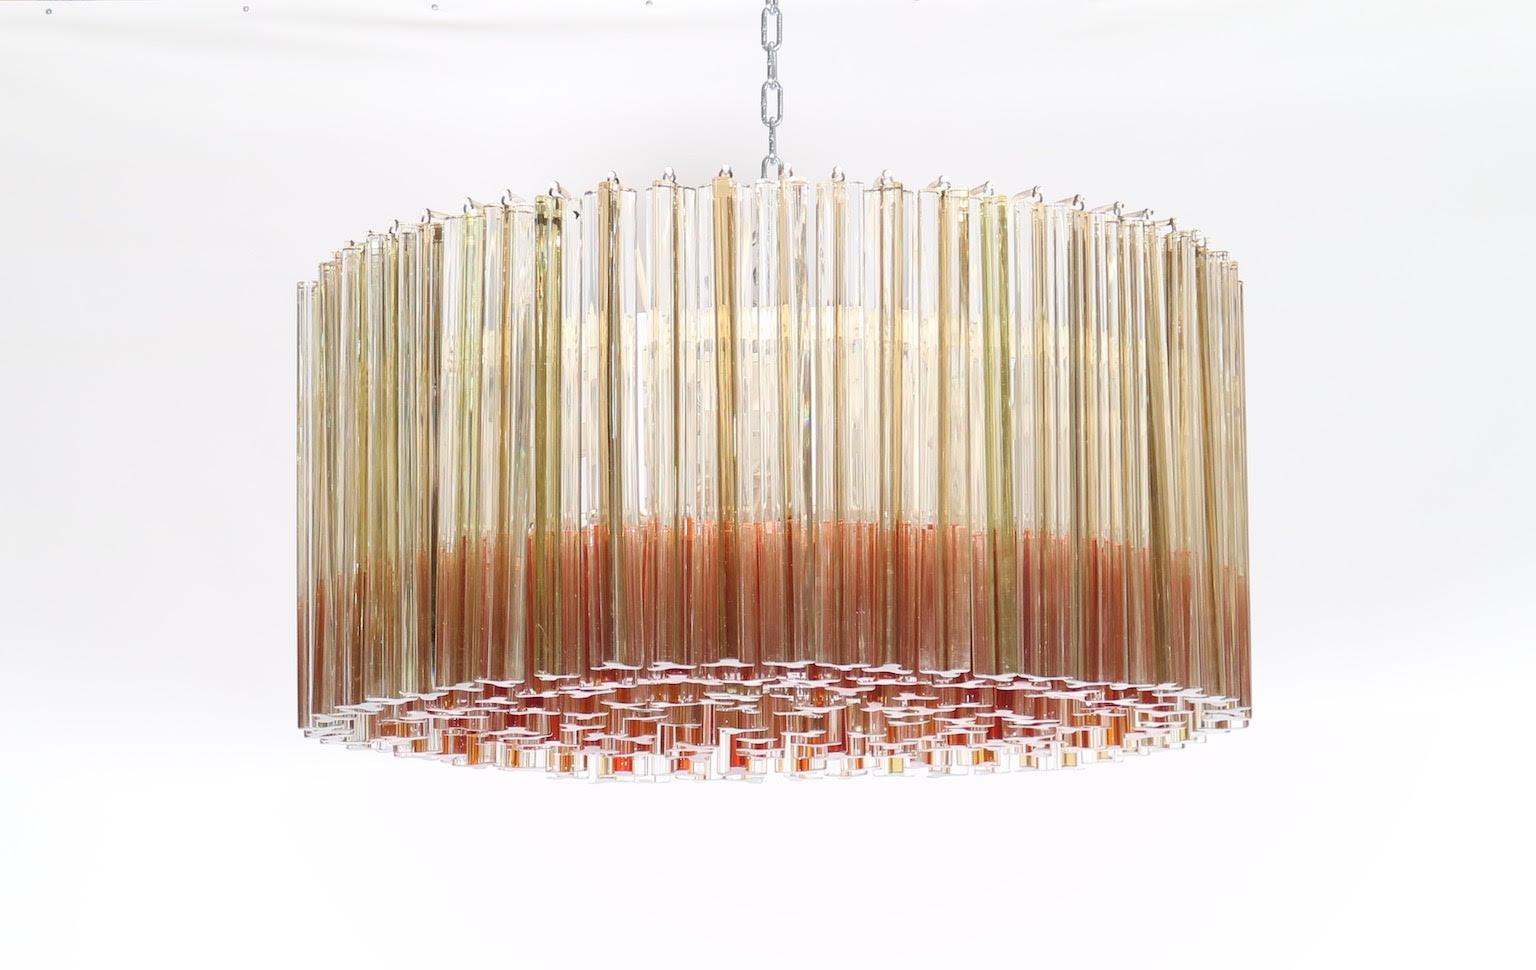 Italian Hollywood Regency Murano chandelier by Venini with Sommerso Trilobo glass rods in amber and clear glass.
The piece was made during the 1950s in Italy and has been fully restored with all new wiring and sockets. In good vintage condition